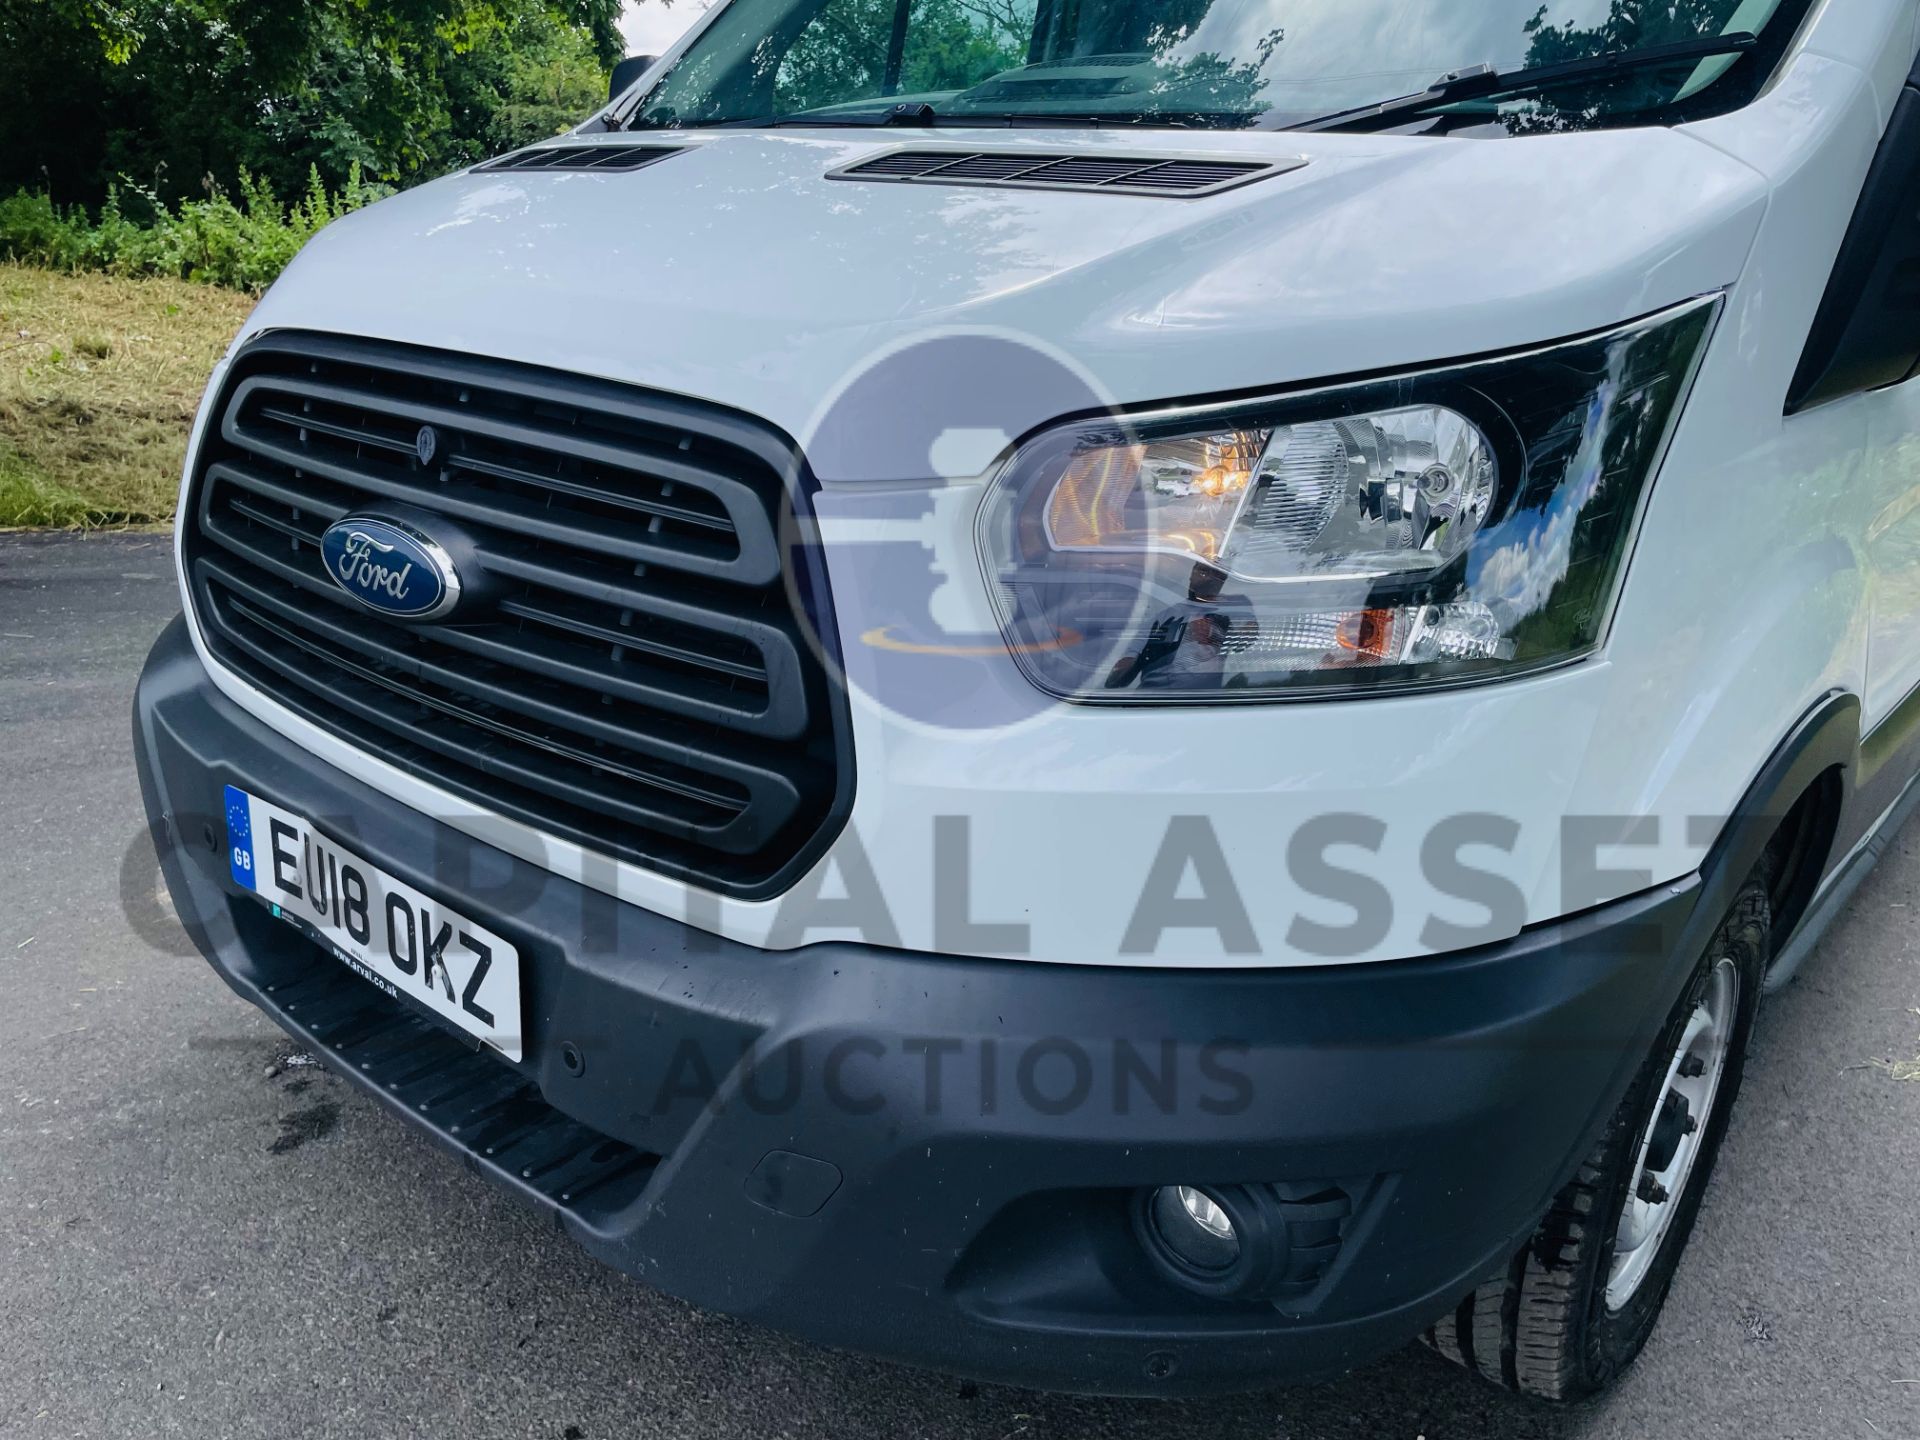 (On Sale) FORD TRANSIT *PANEL VAN* (2018 - EURO 6) 2.0 TDCI 'ECOBLUE' (1 OWNER) *AIR CON & NAV* - Image 16 of 43